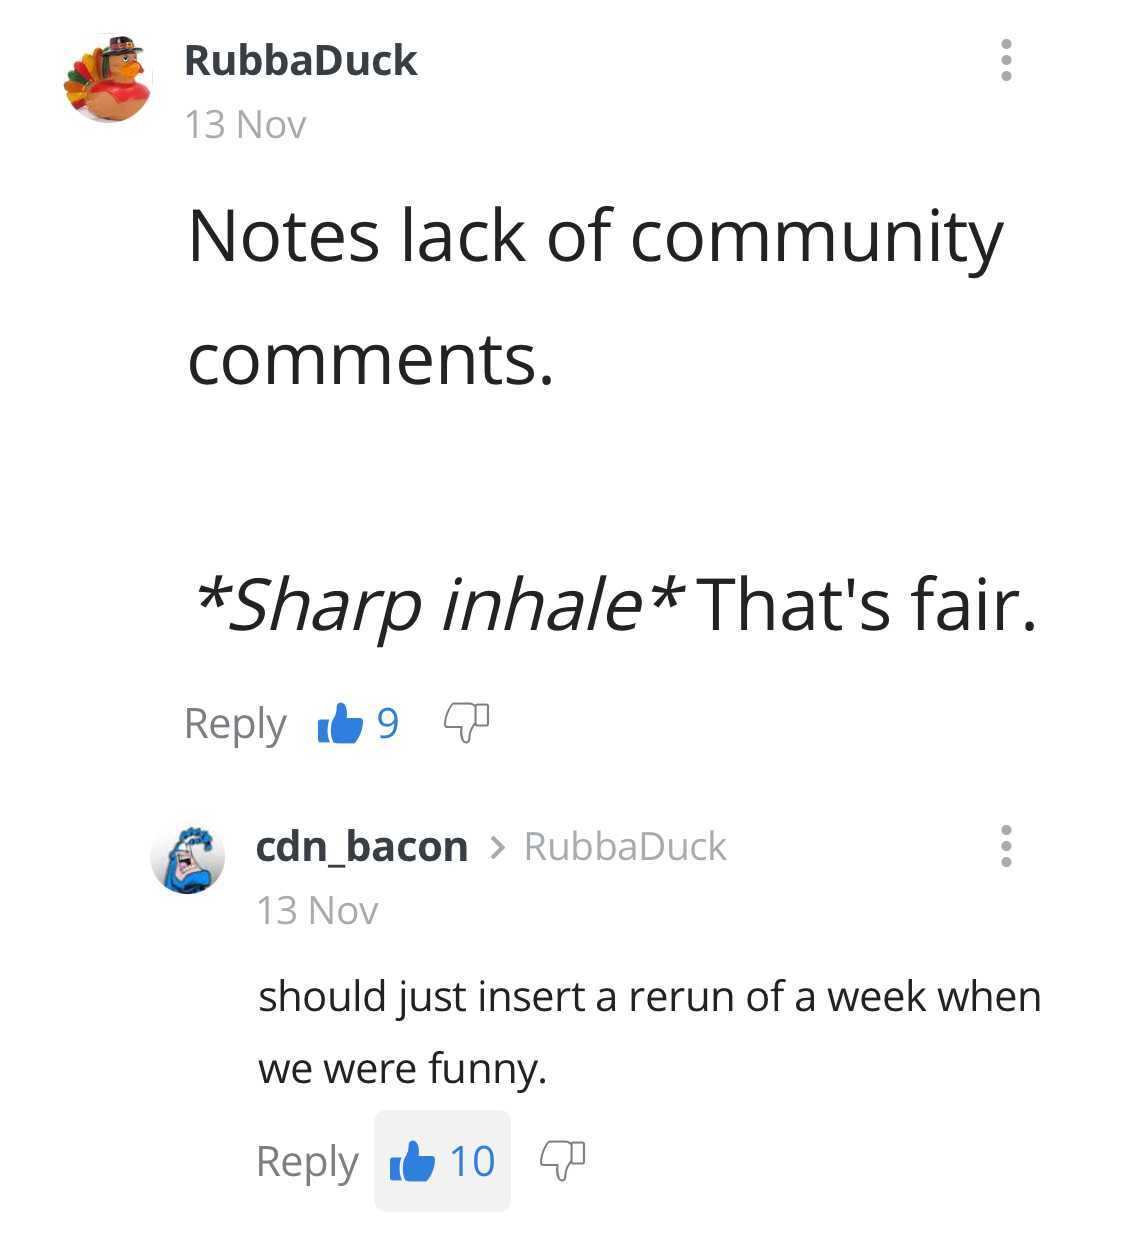 number - RubbaDuck 13 Nov Notes lack of community . Sharp inhale That's fair. 169 cdn bacon > RubbaDuck 13 Nov should just insert a rerun of a week when we were funny it 10